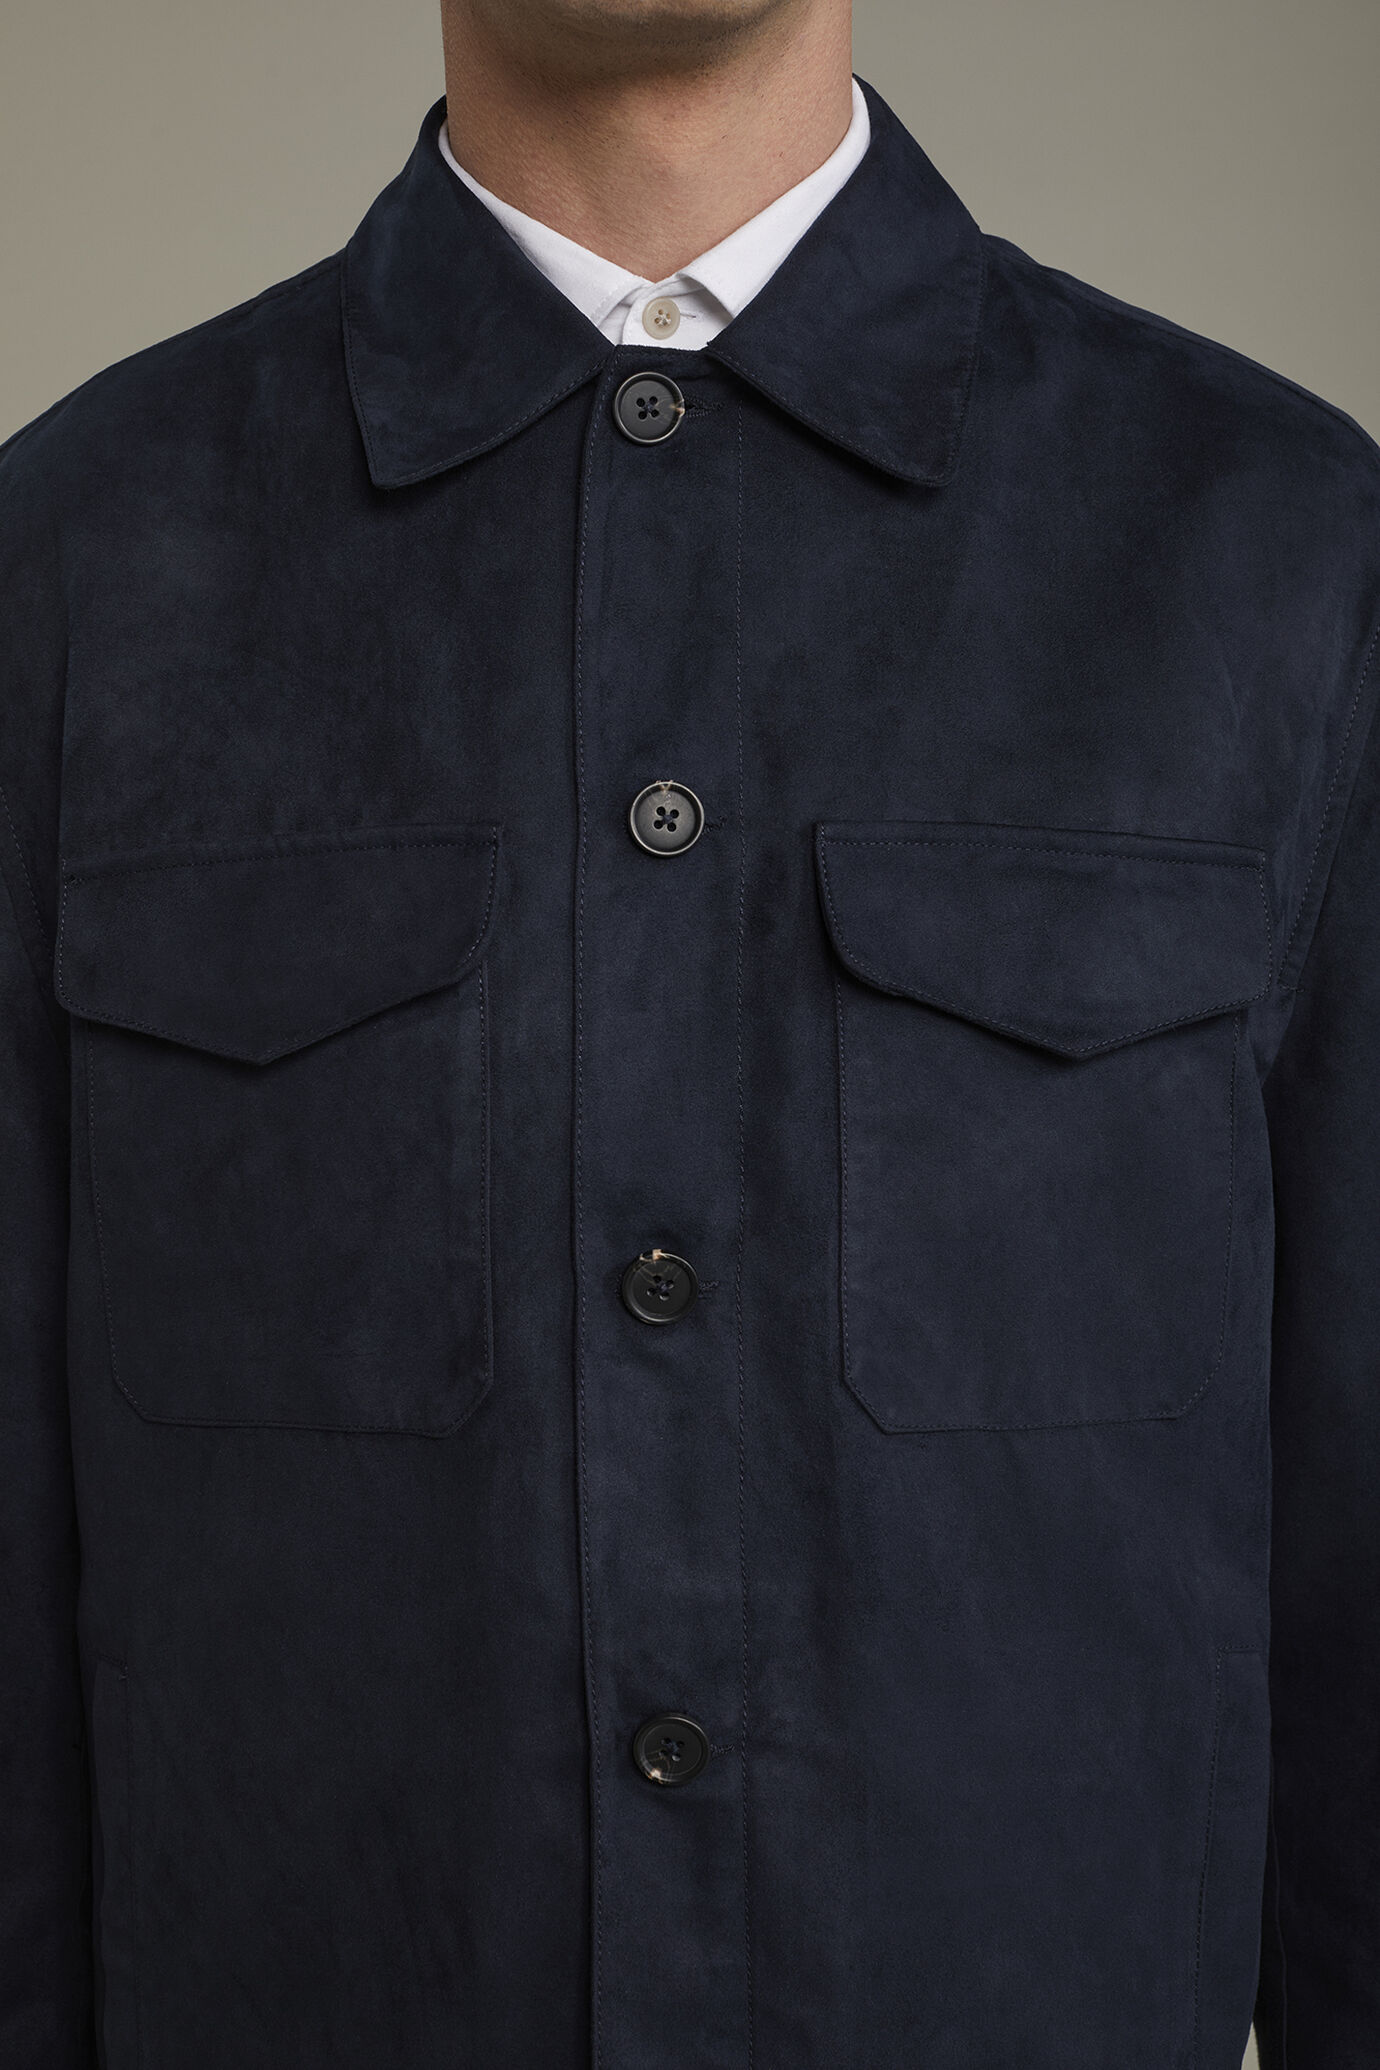 Men's jacket with suede-like fabric regular fit image number 3